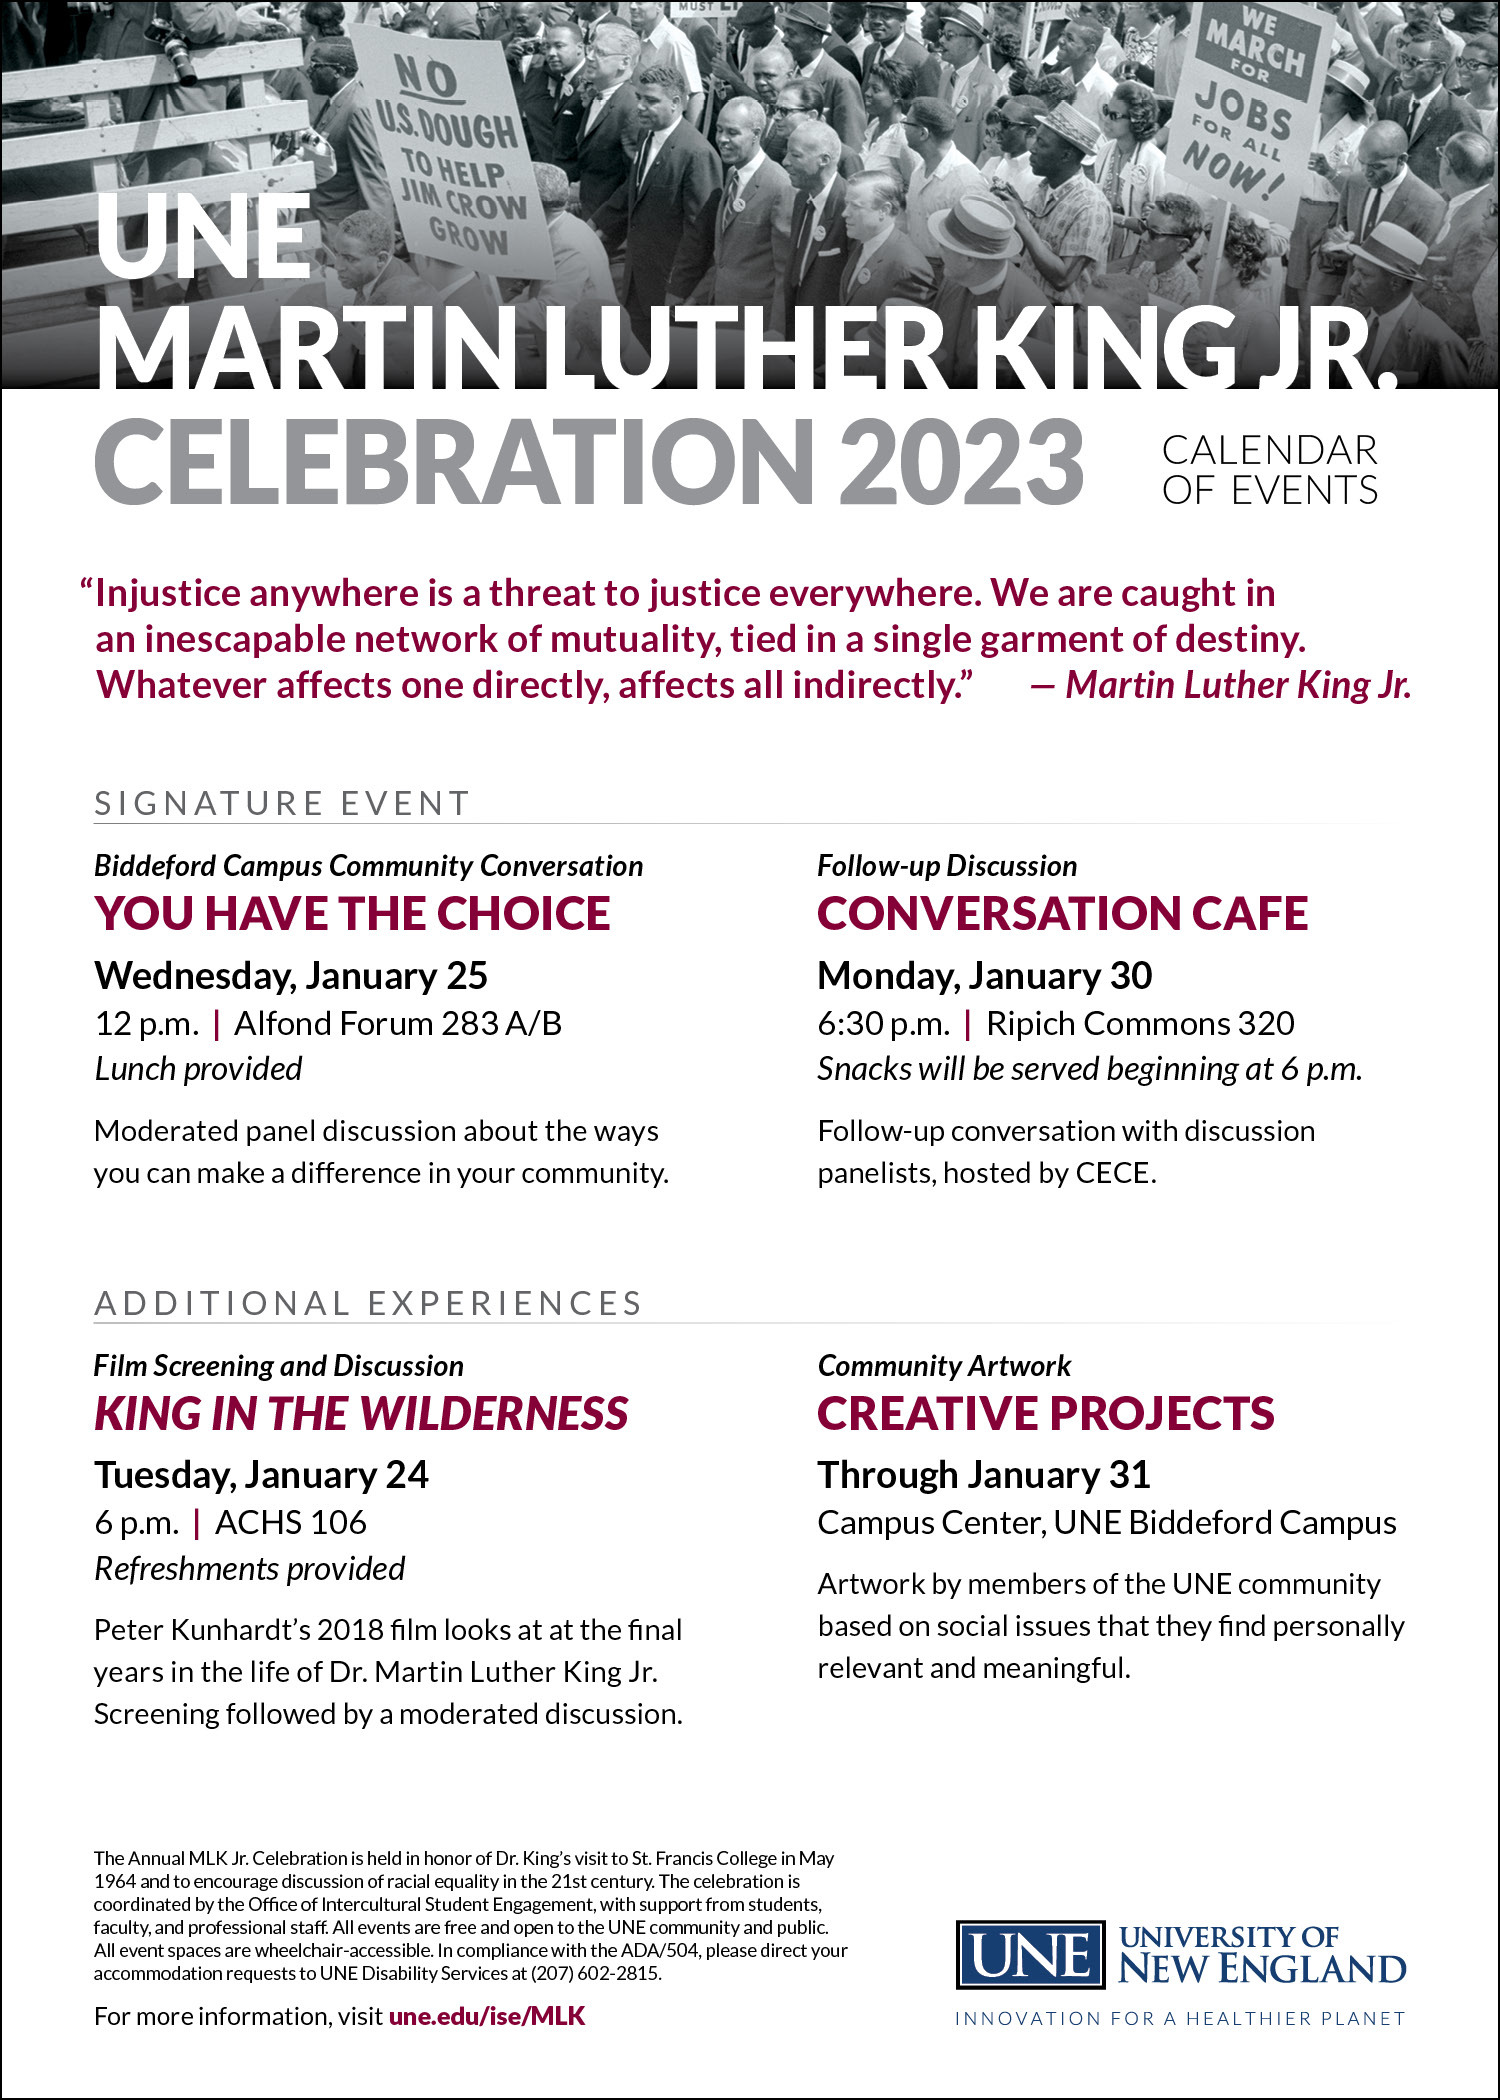 Poster detailing upcoming events for U N E's Martin Luther King celebration